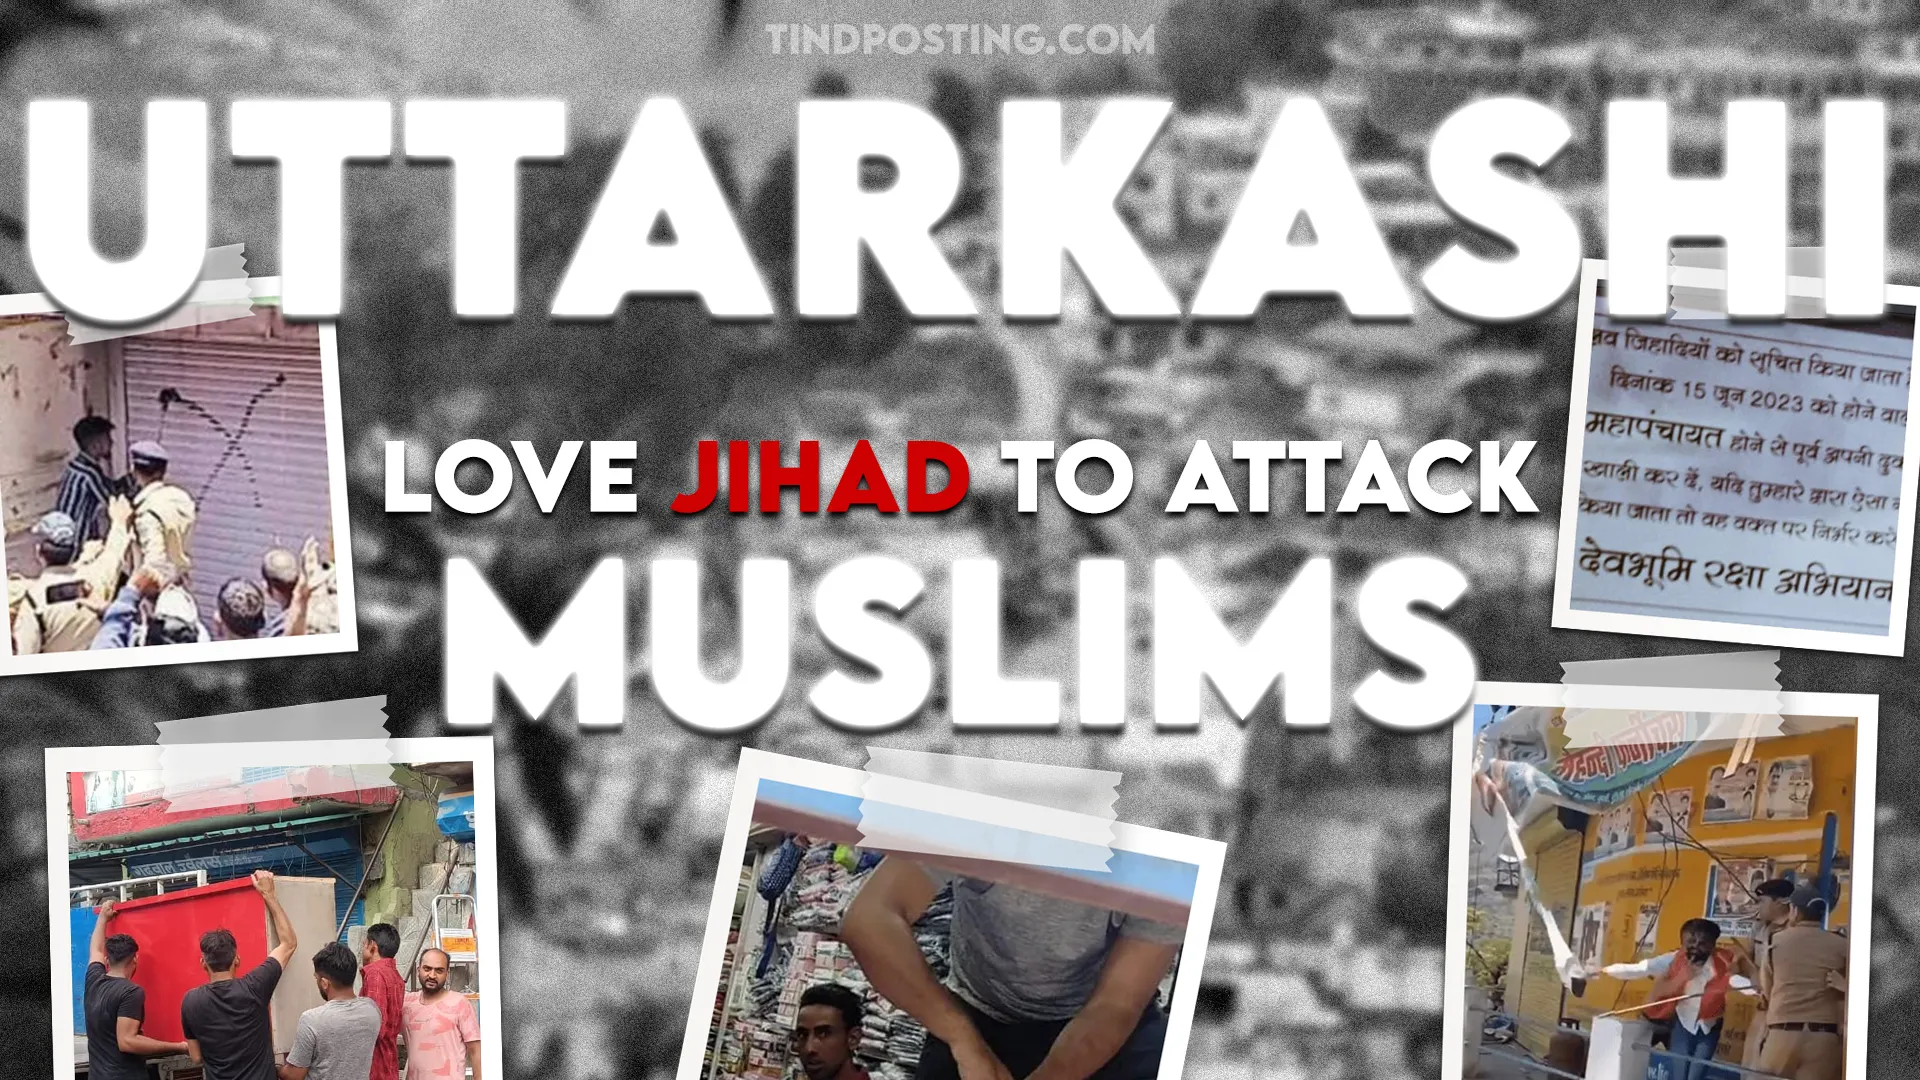 “Love-Jihad” narrative in Uttarakhand was found to be fake—setup to force Muslims out of the land.